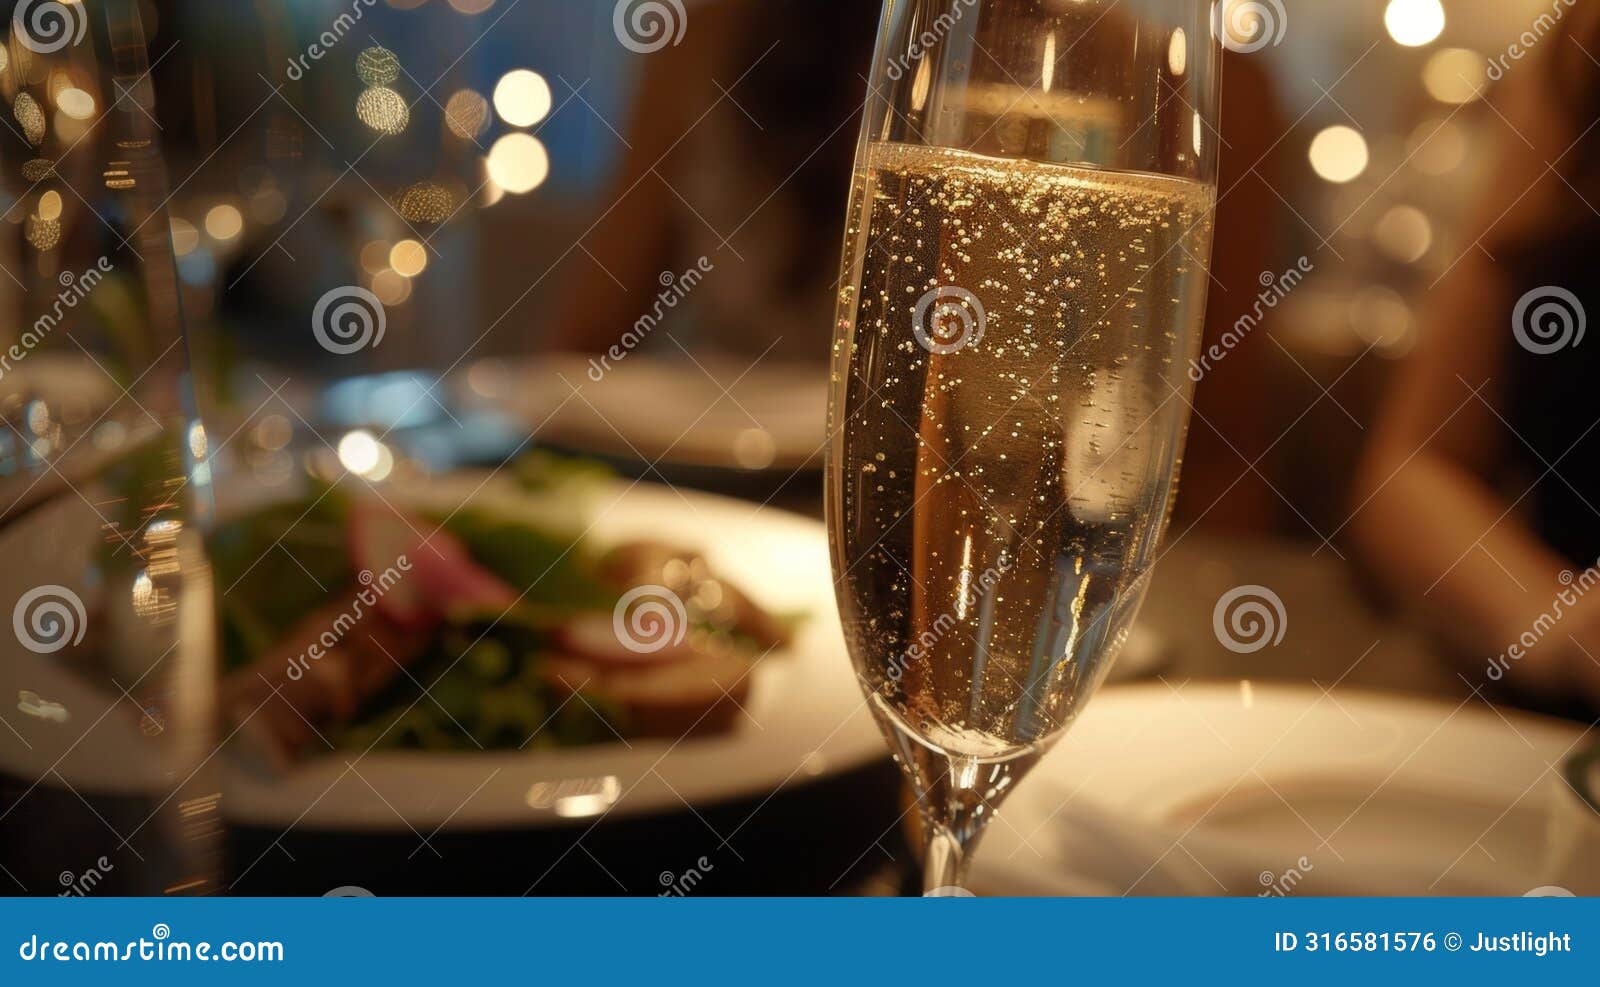 guests are greeted with a glass of sparkling champagne adding a touch of elegance and celebration to the dining